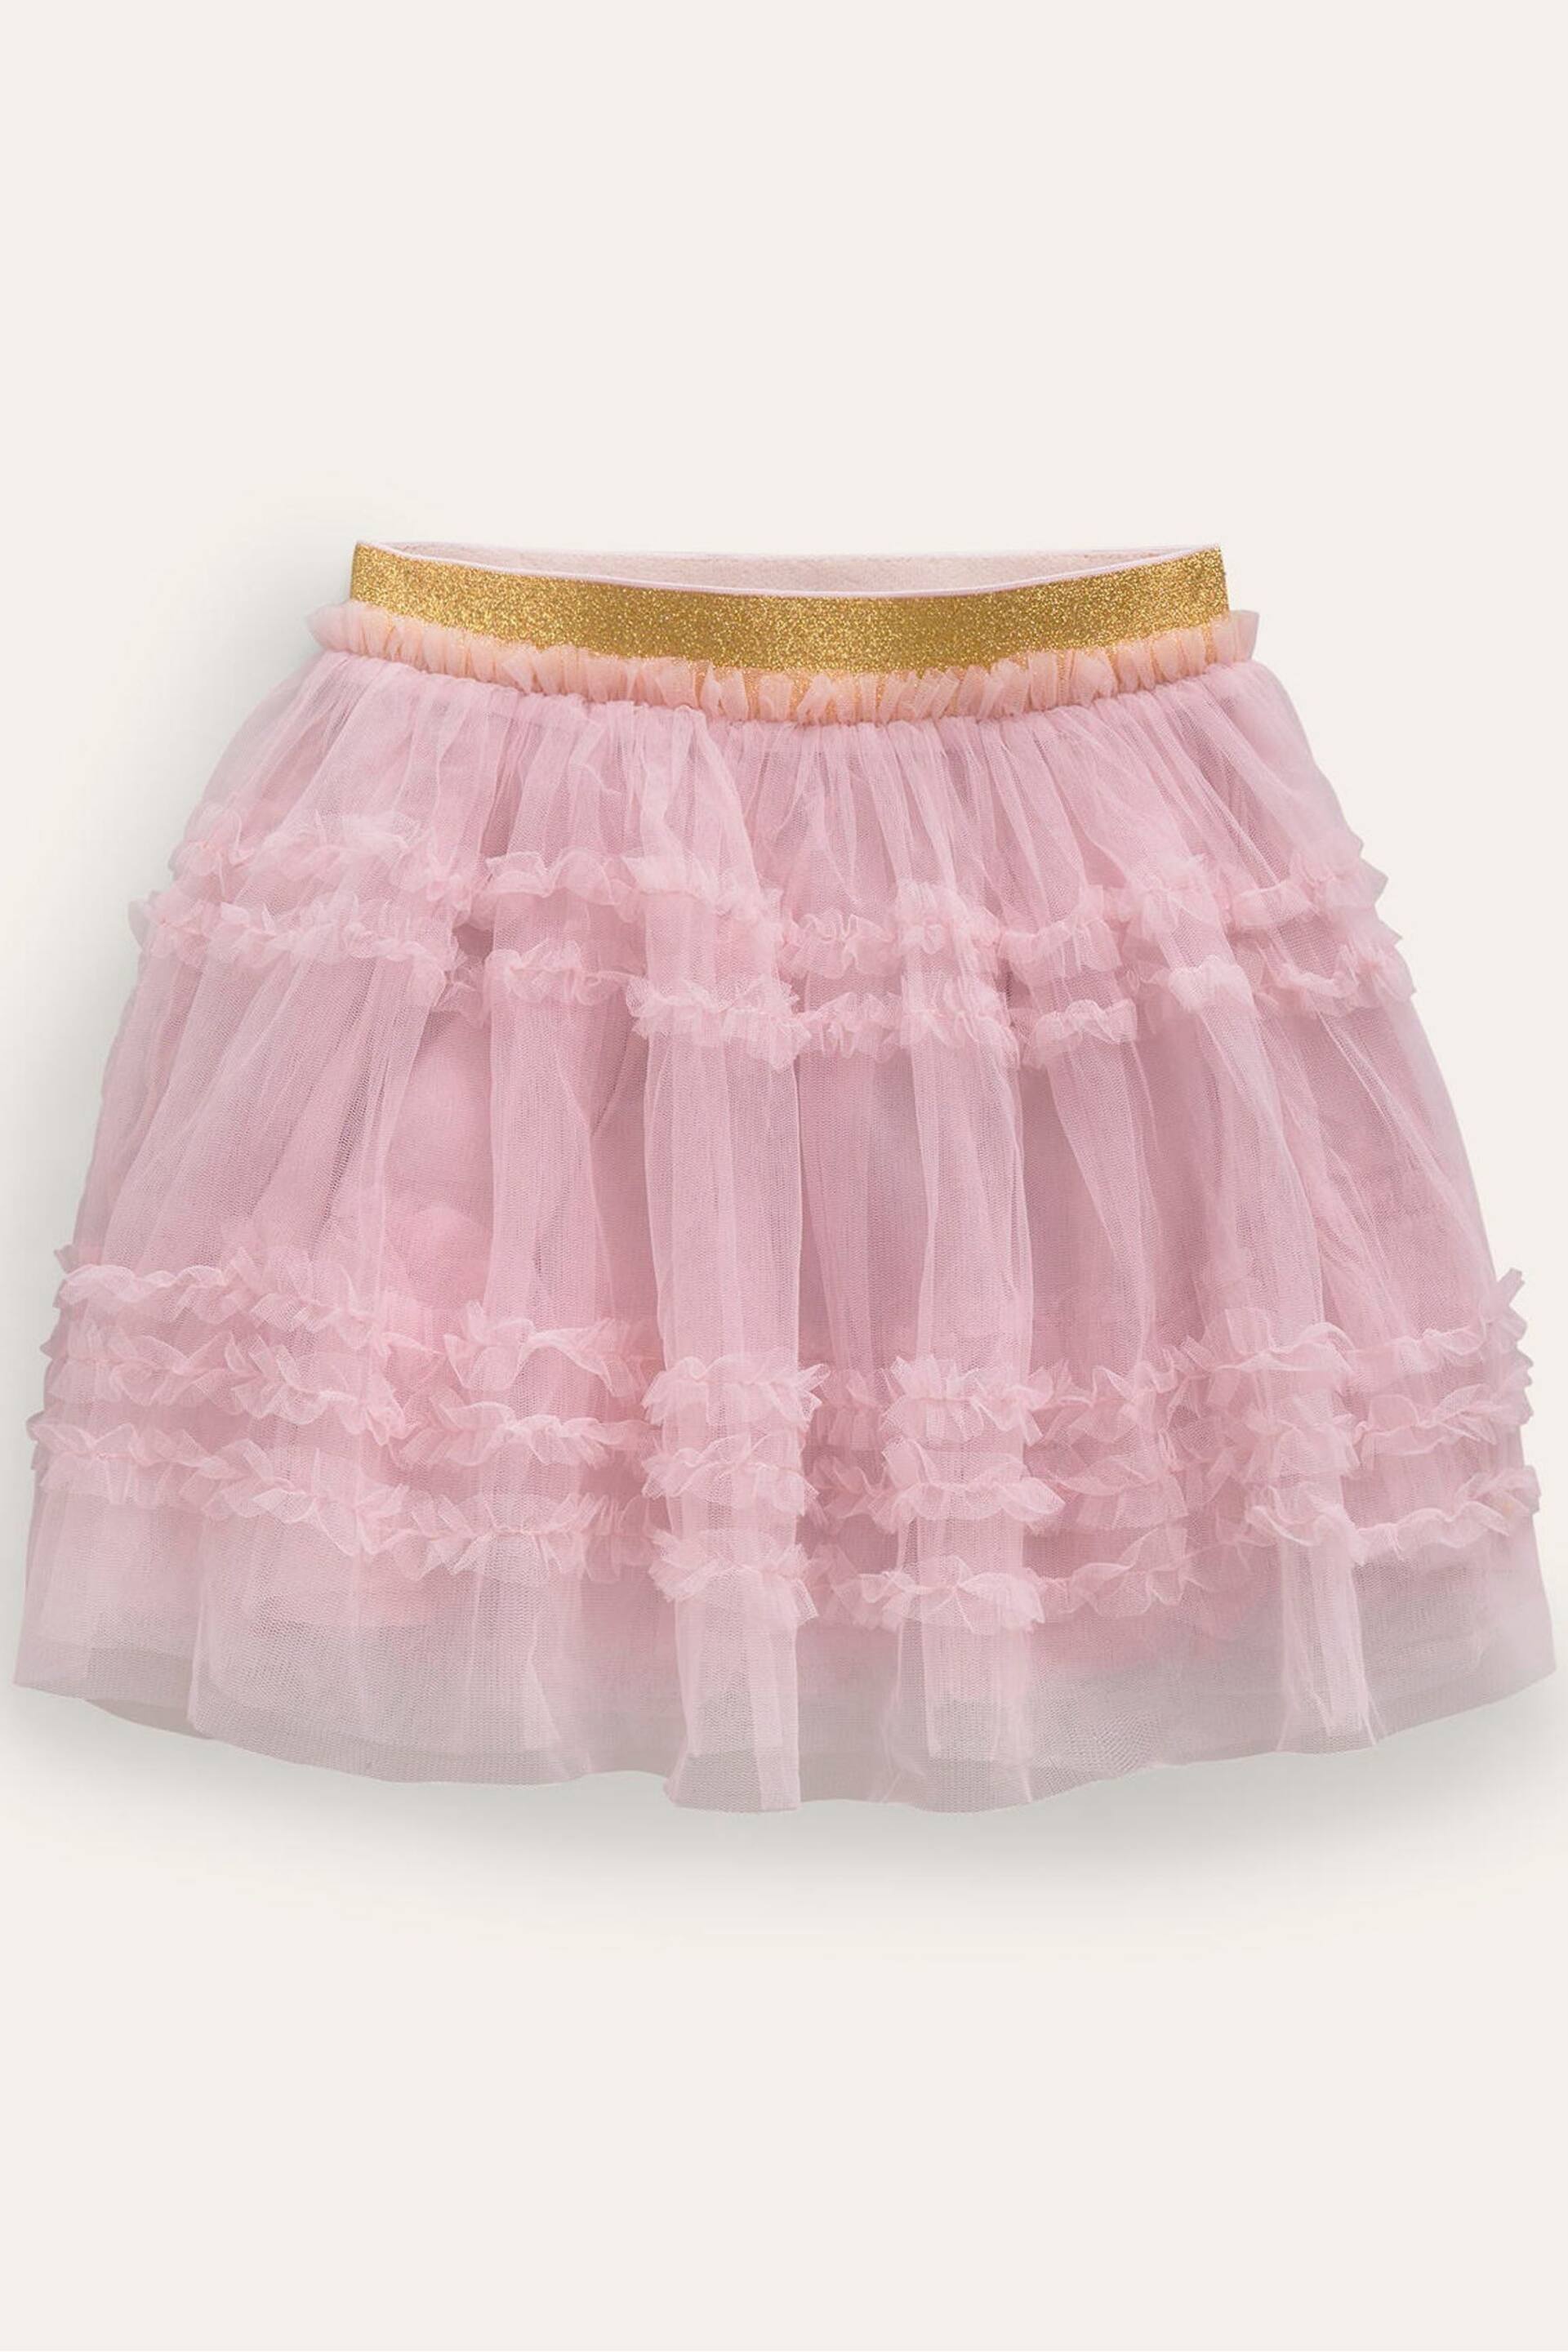 Boden Pink Tulle Party Skirt - Image 3 of 4